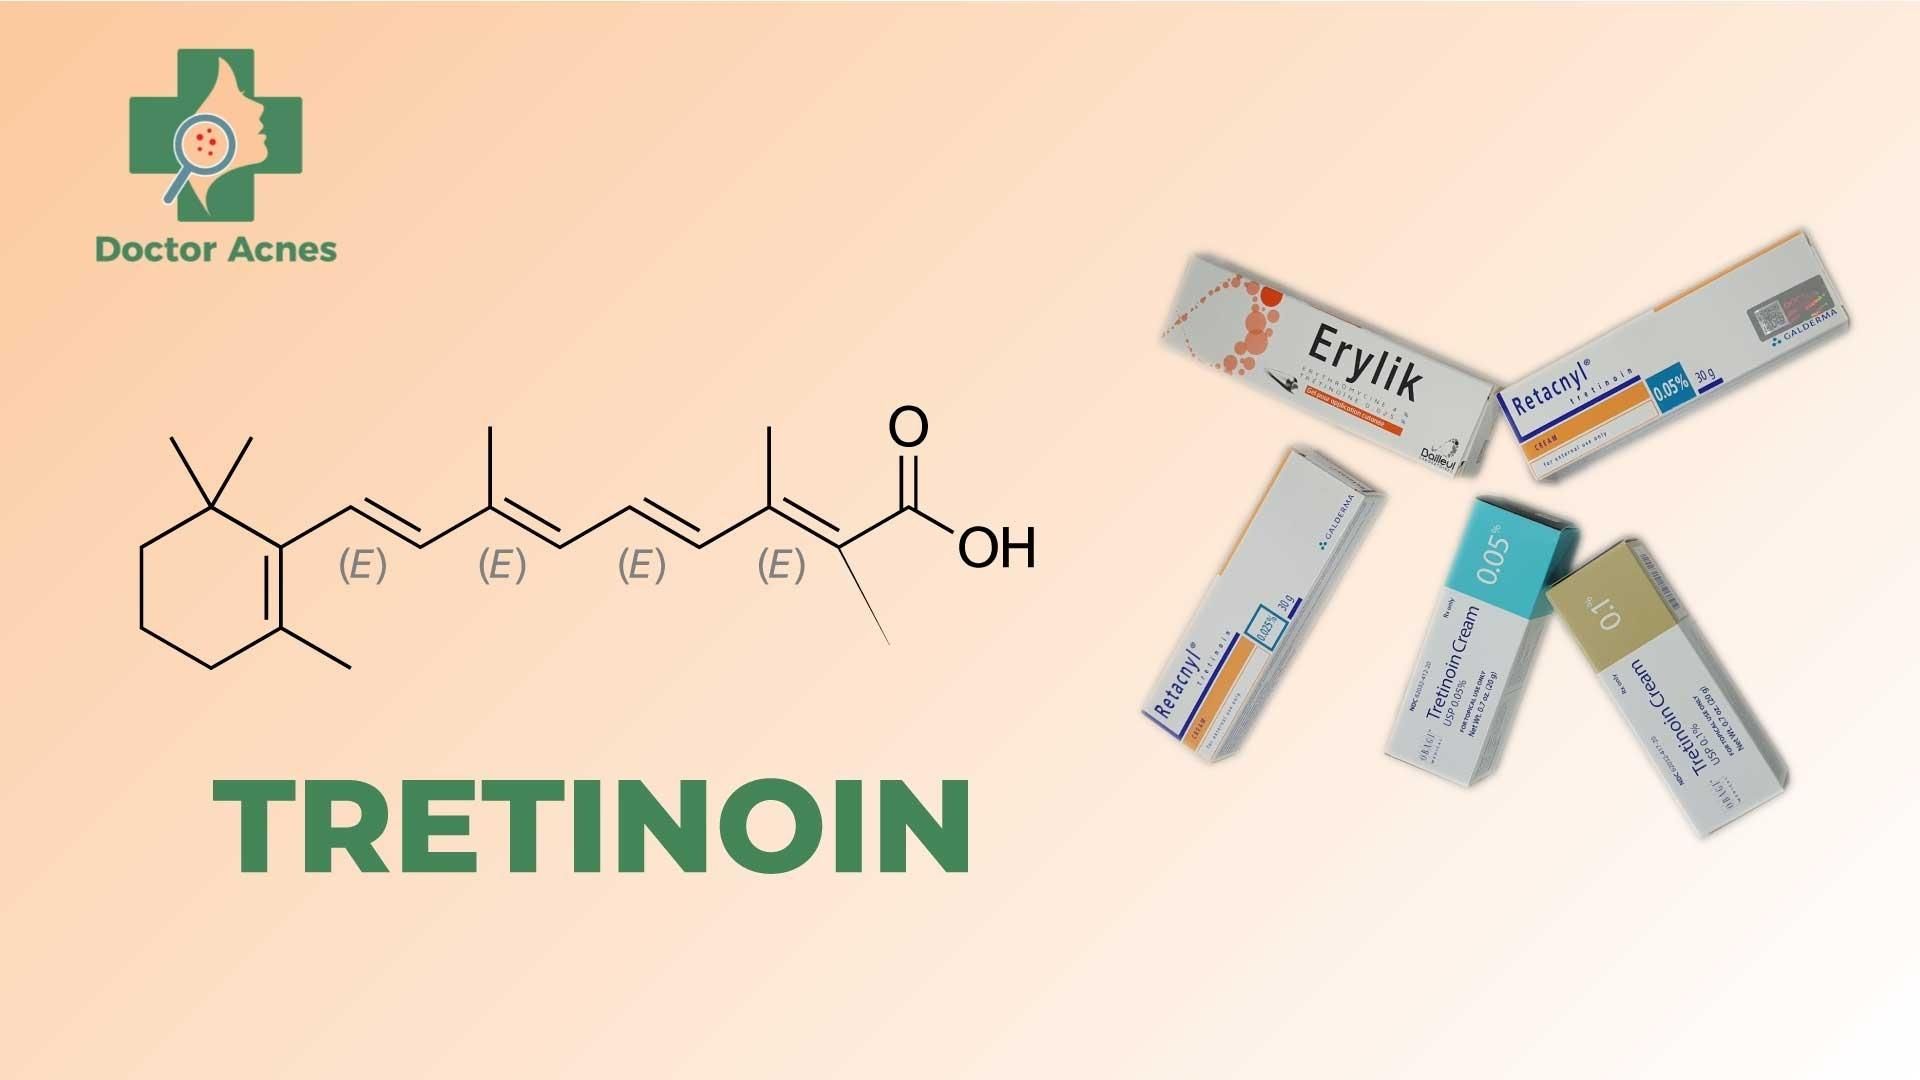 Tretinoin - Doctor Acnes